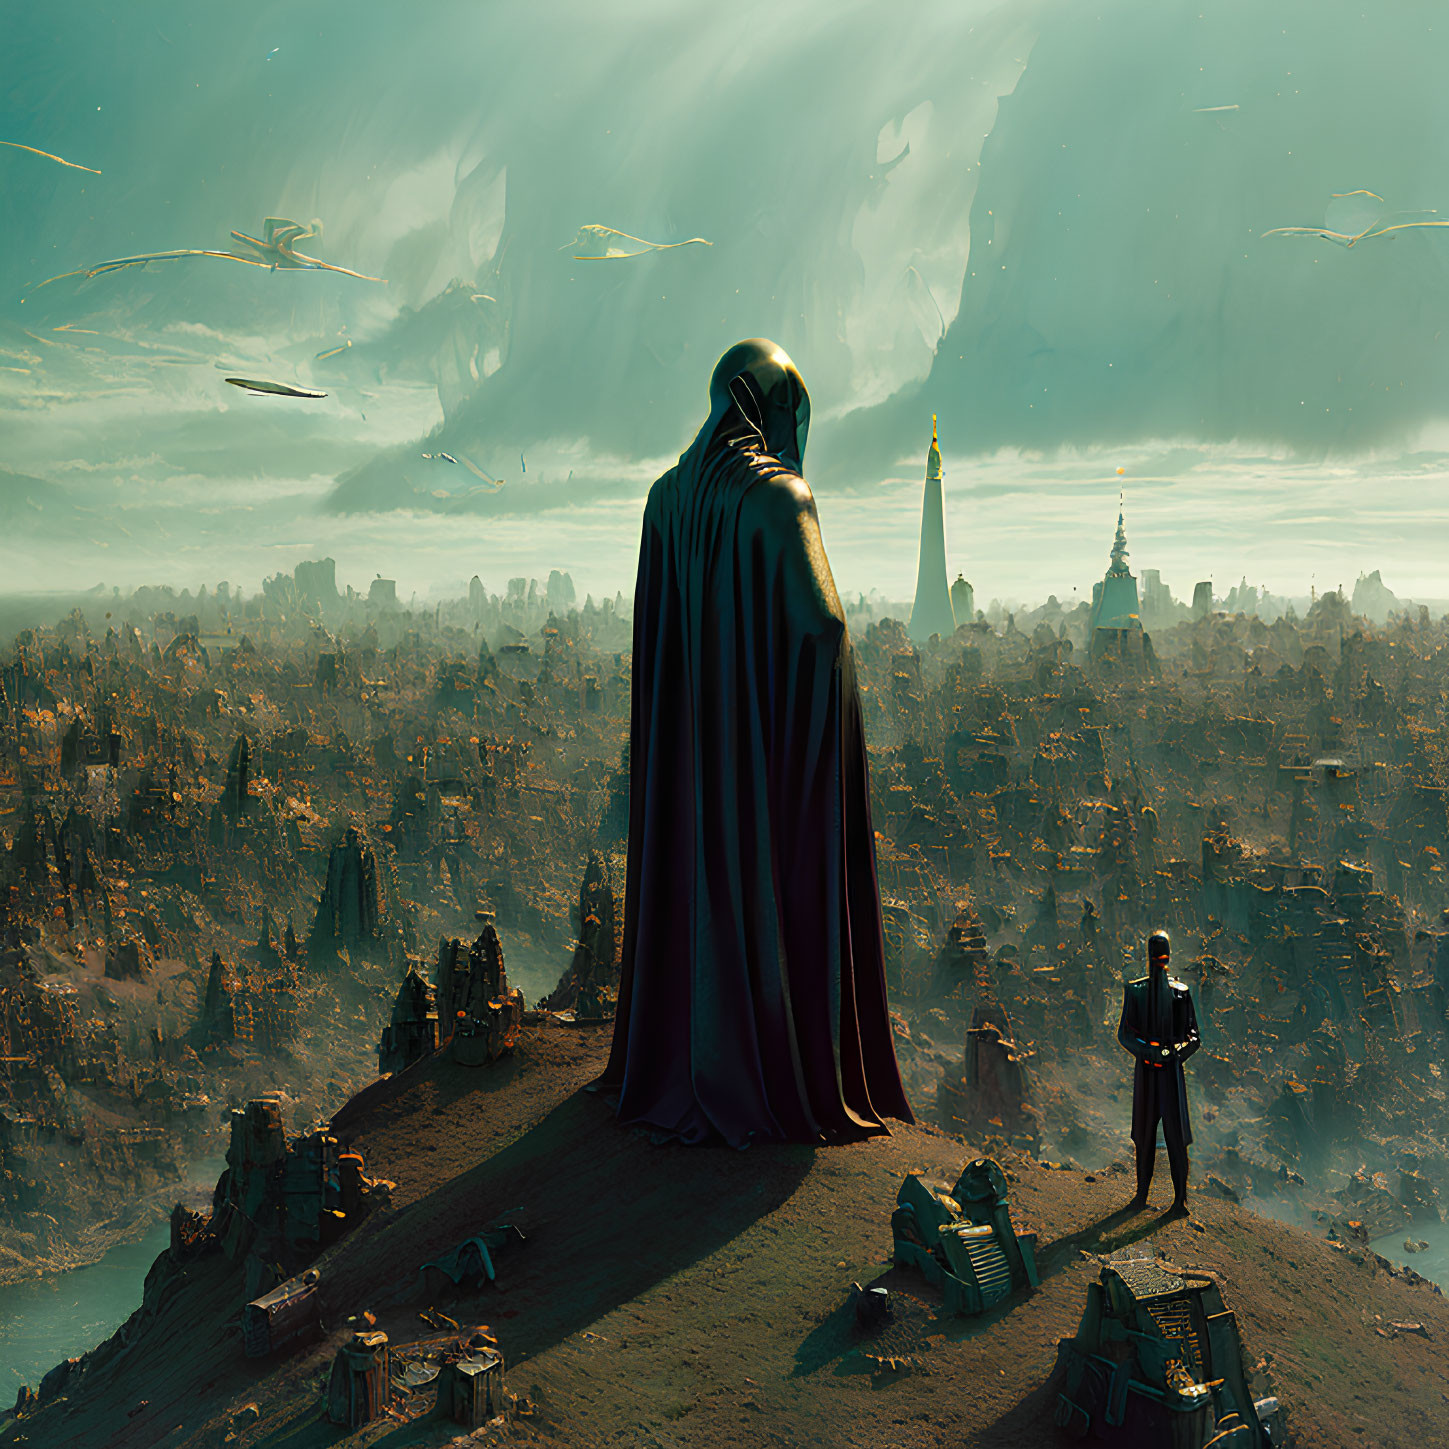 Cloaked figure on hill overlooking dystopian cityscape with flying creatures.